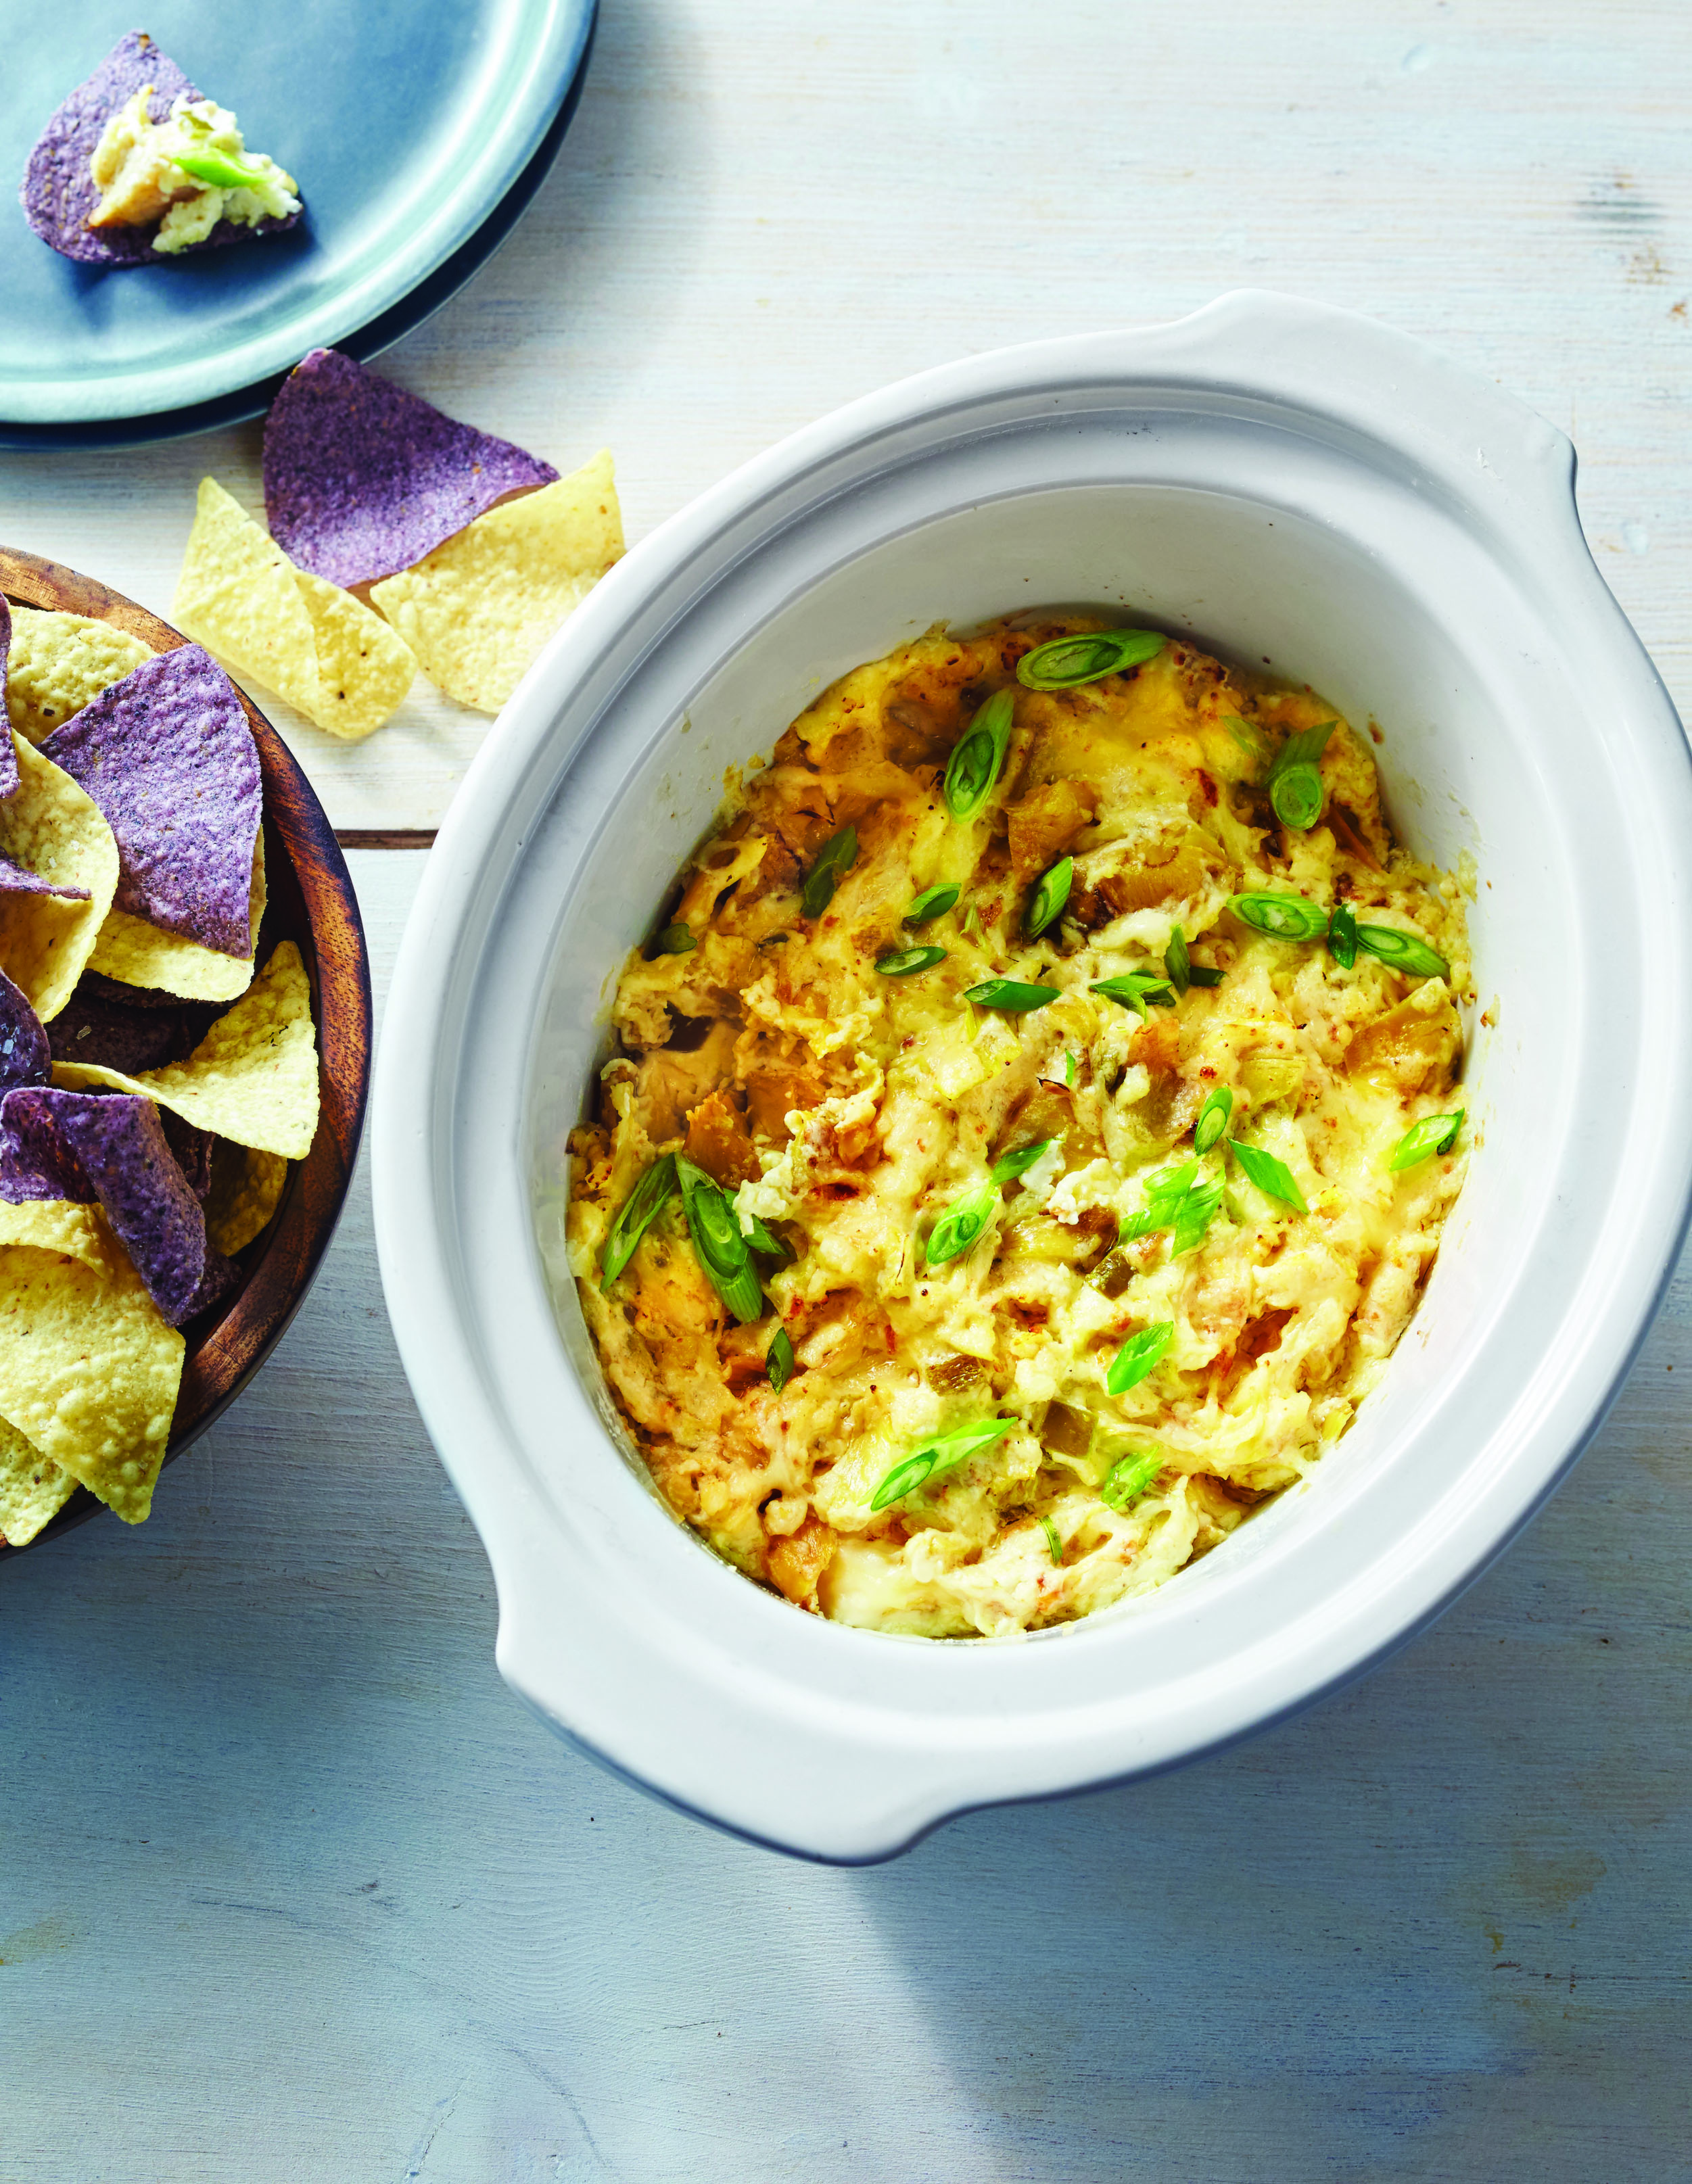 This artichoke dip is a quick and easy make in the crock pot, made with a blend of four kinds of cheese and the classic ingredients you crave.